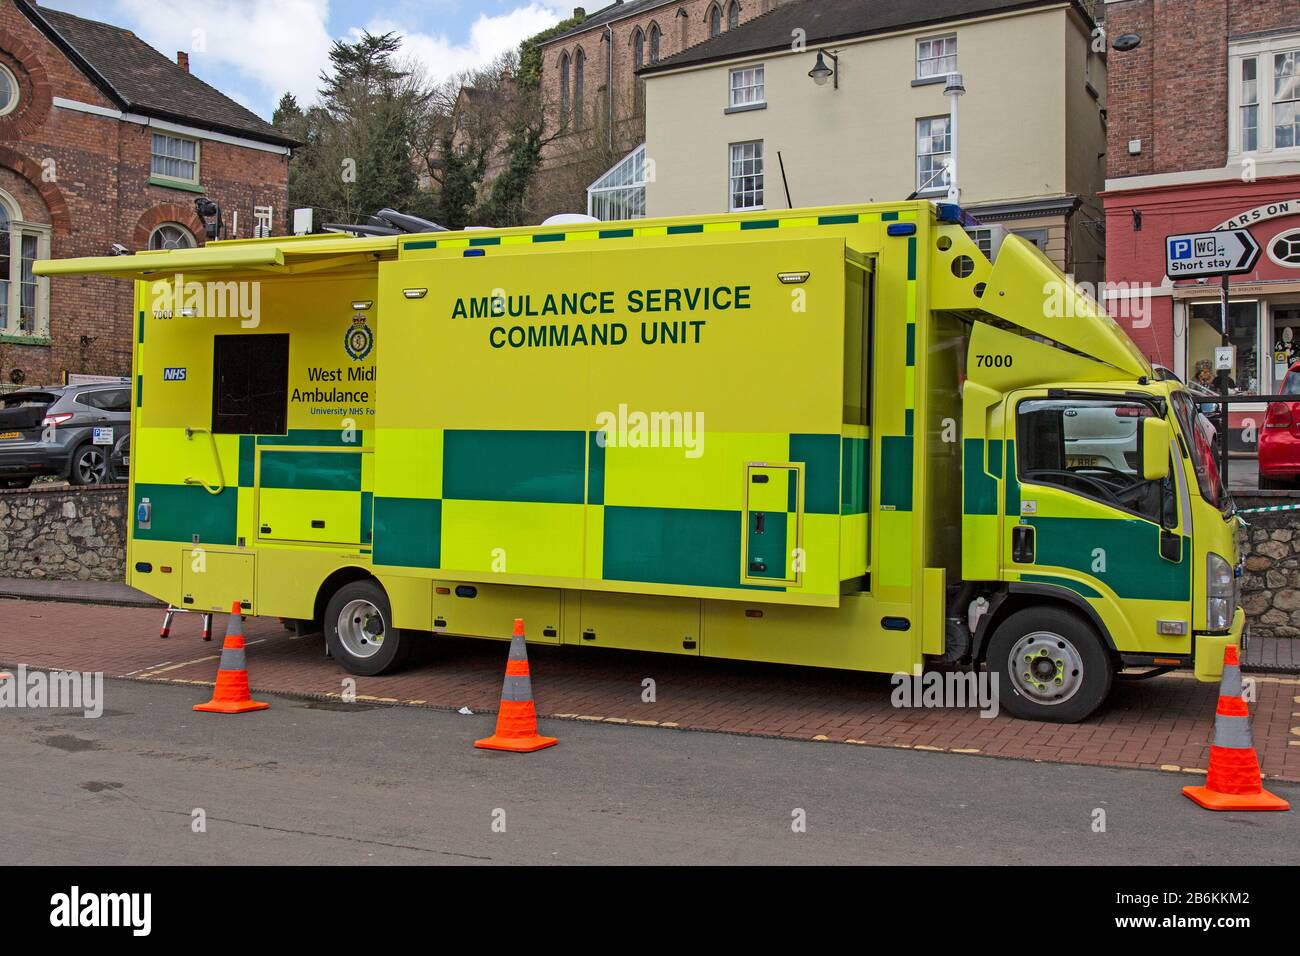 A mobile Ambulance Service Command Unit provided by the British National Health Service for emergency situations. Stock Photo